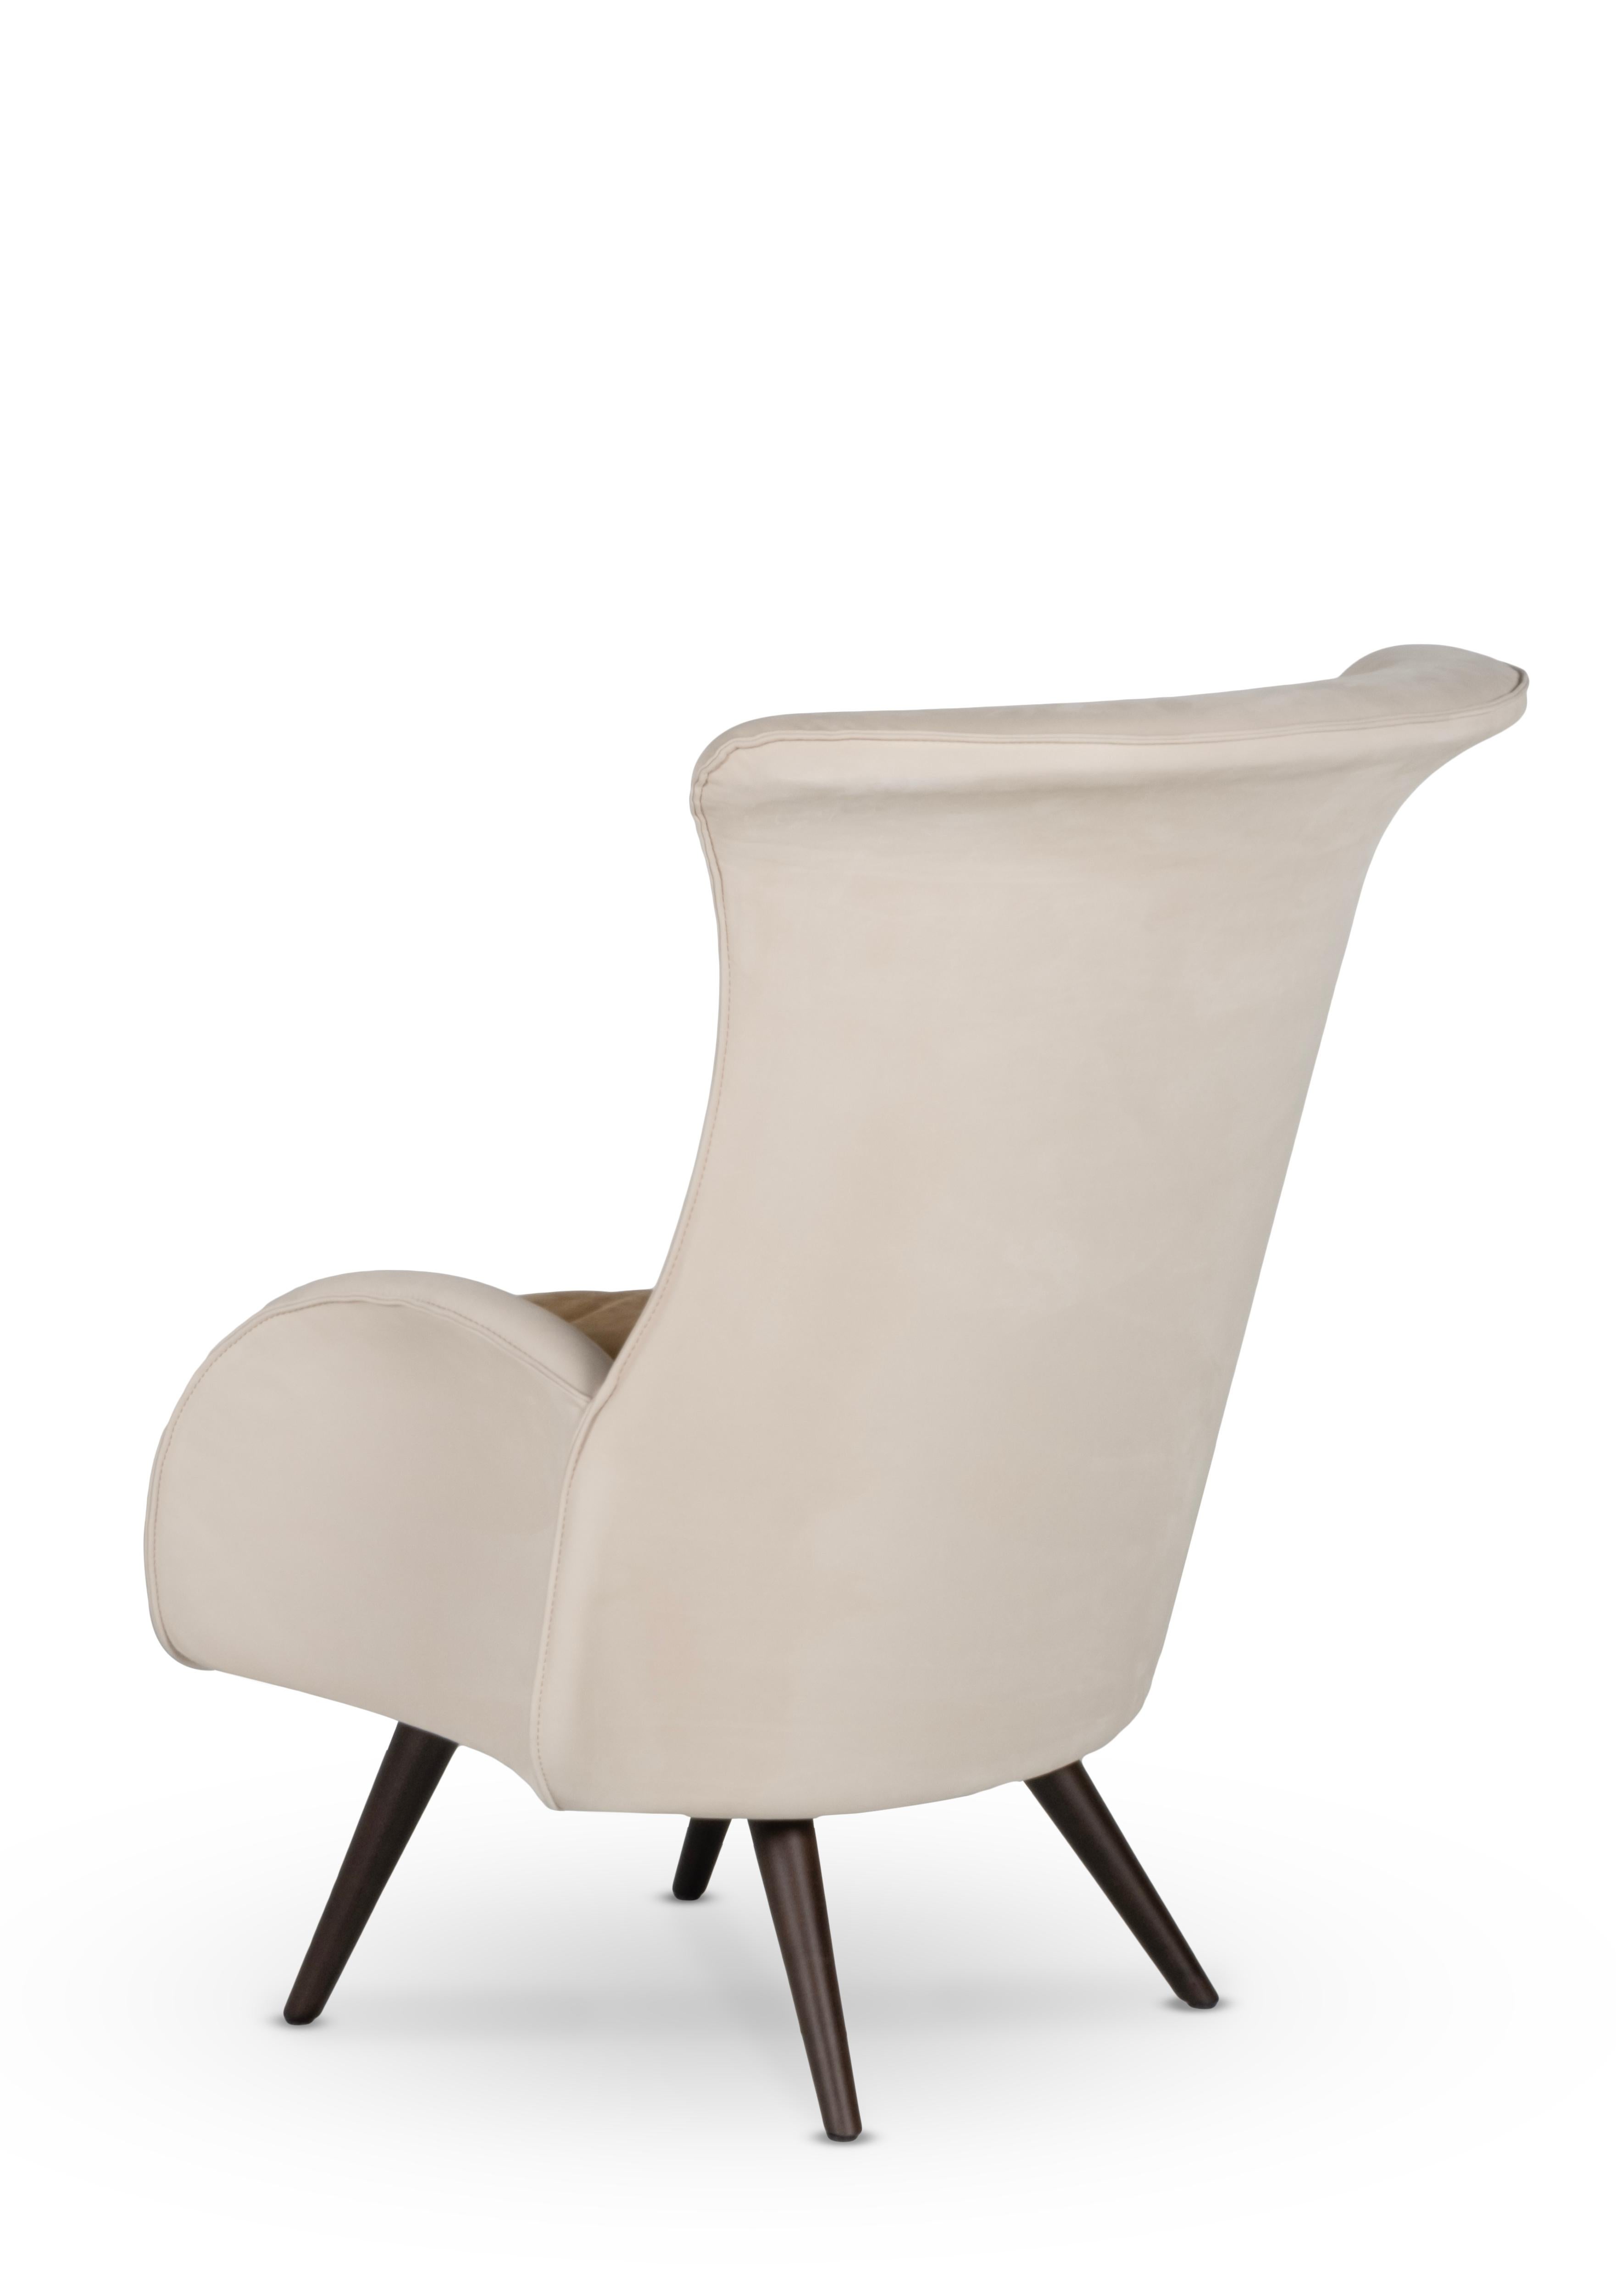 Hand-Crafted Modern Barao Lounge Chair, Beige Nubuck Leather, Handmade Portugal by Greenapple For Sale